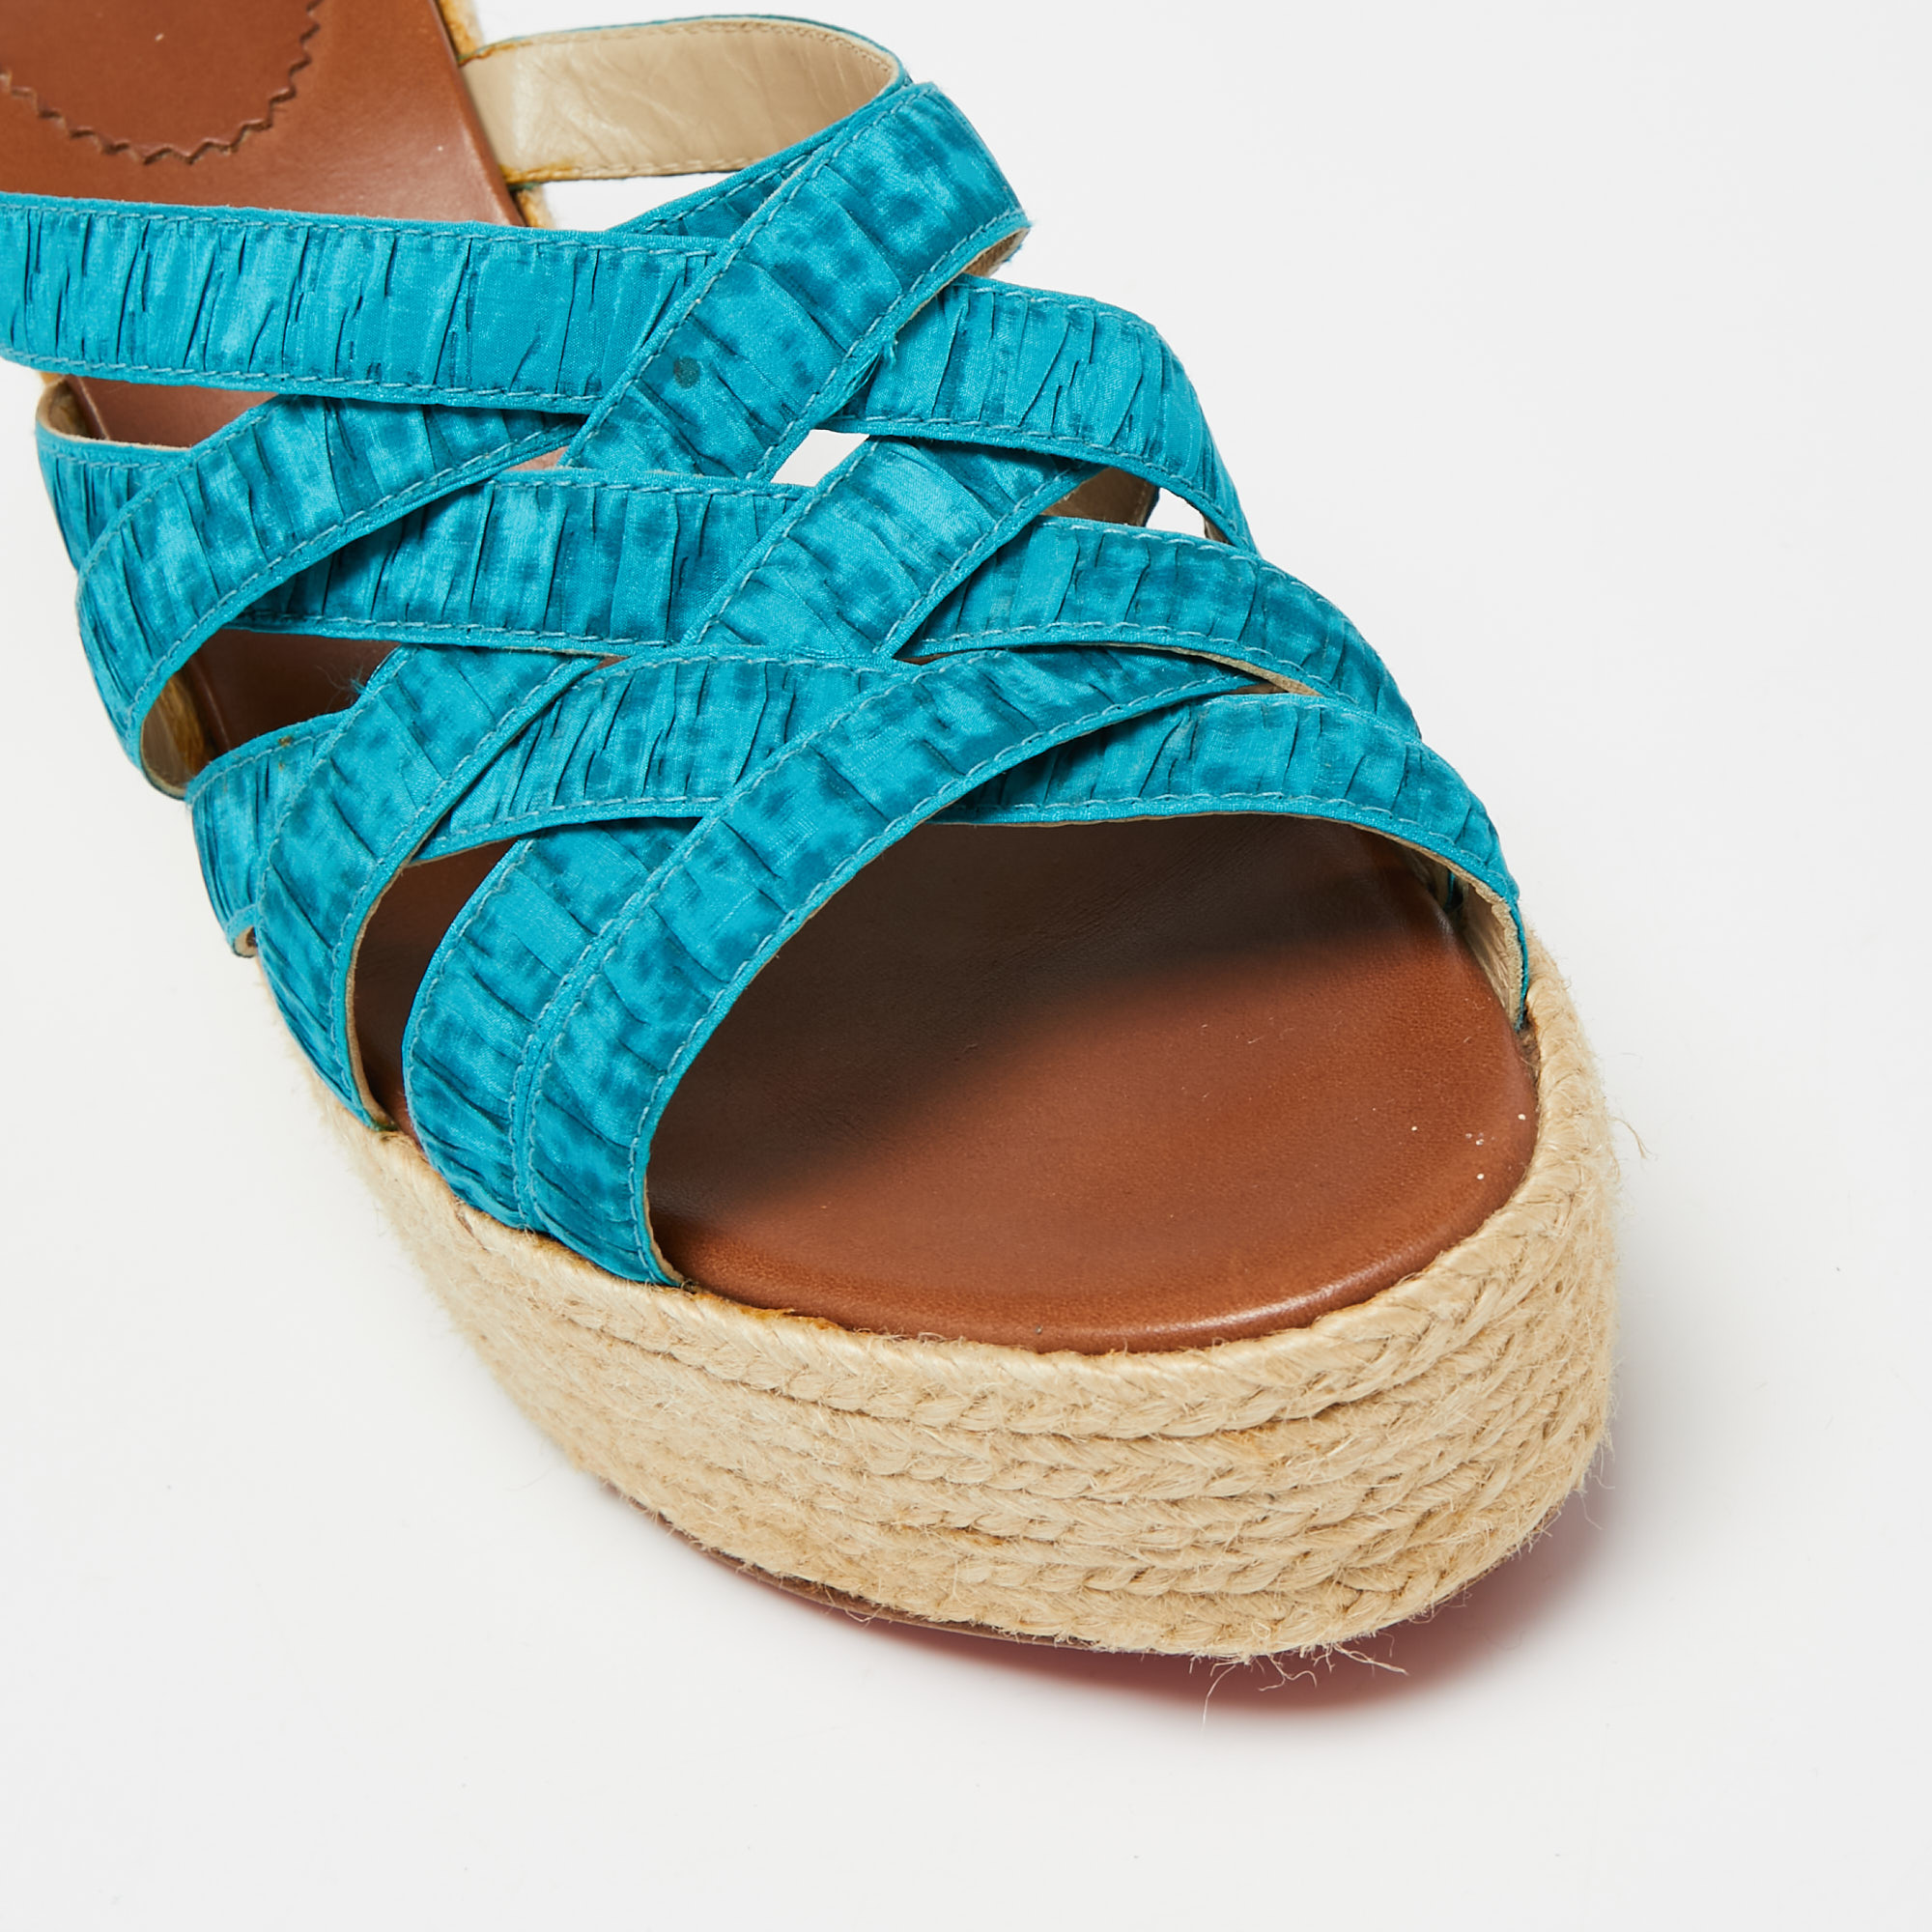 Christian Louboutin Two-Tone Pleated Fabric Crepon Espadrille Platform Wedge Sandals Size 41